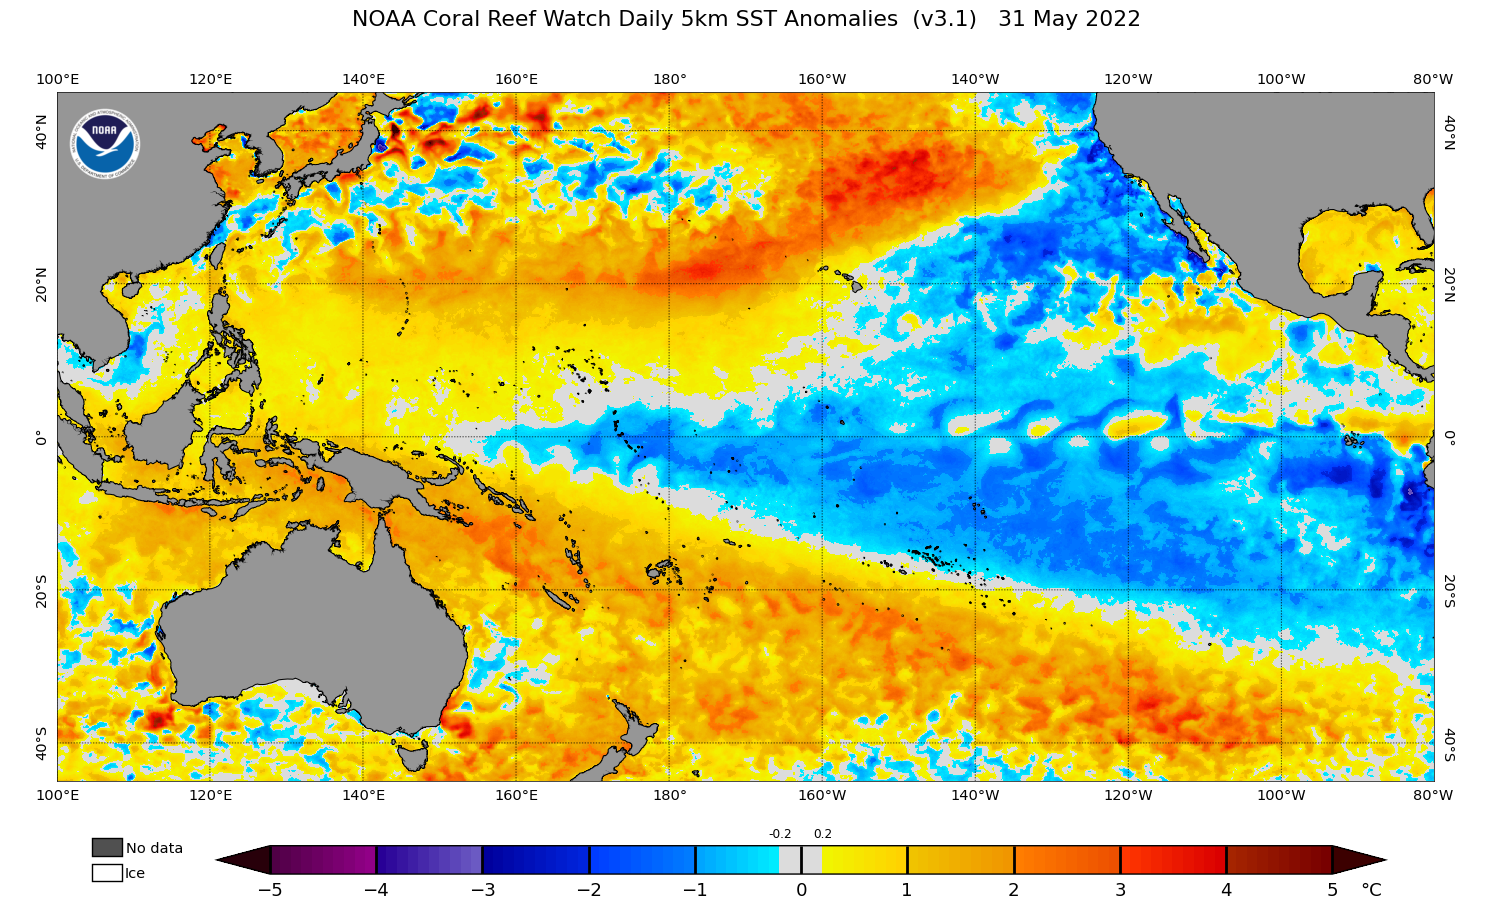 2022 May 31 SST Anomaly map for the Pacific Ocean